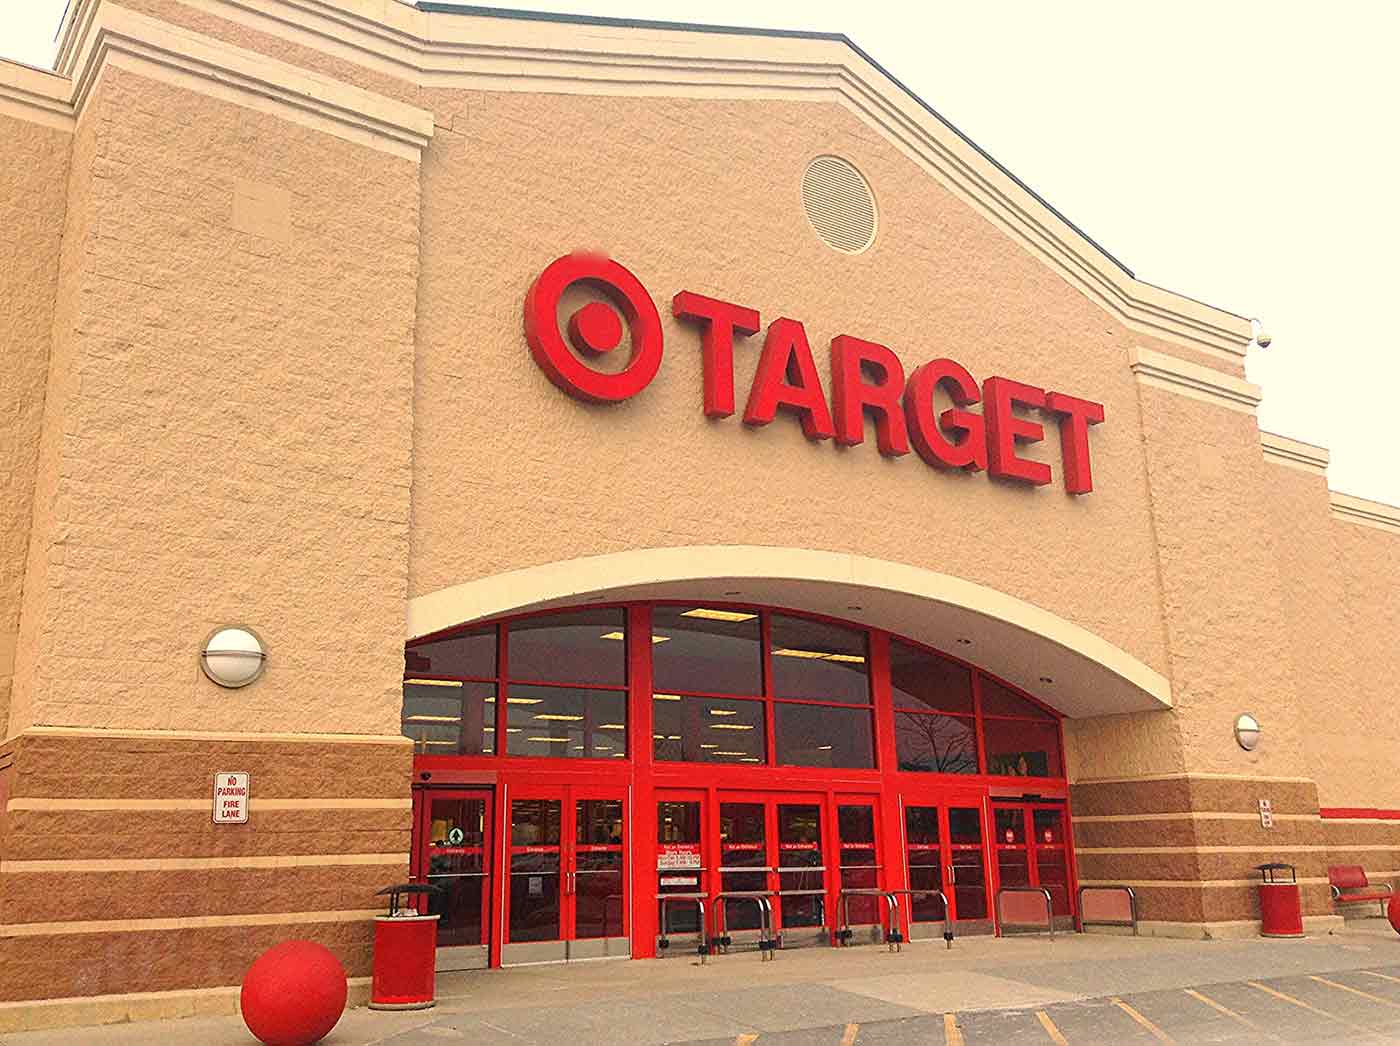 Commercial exterior painting project completed for Target Stores